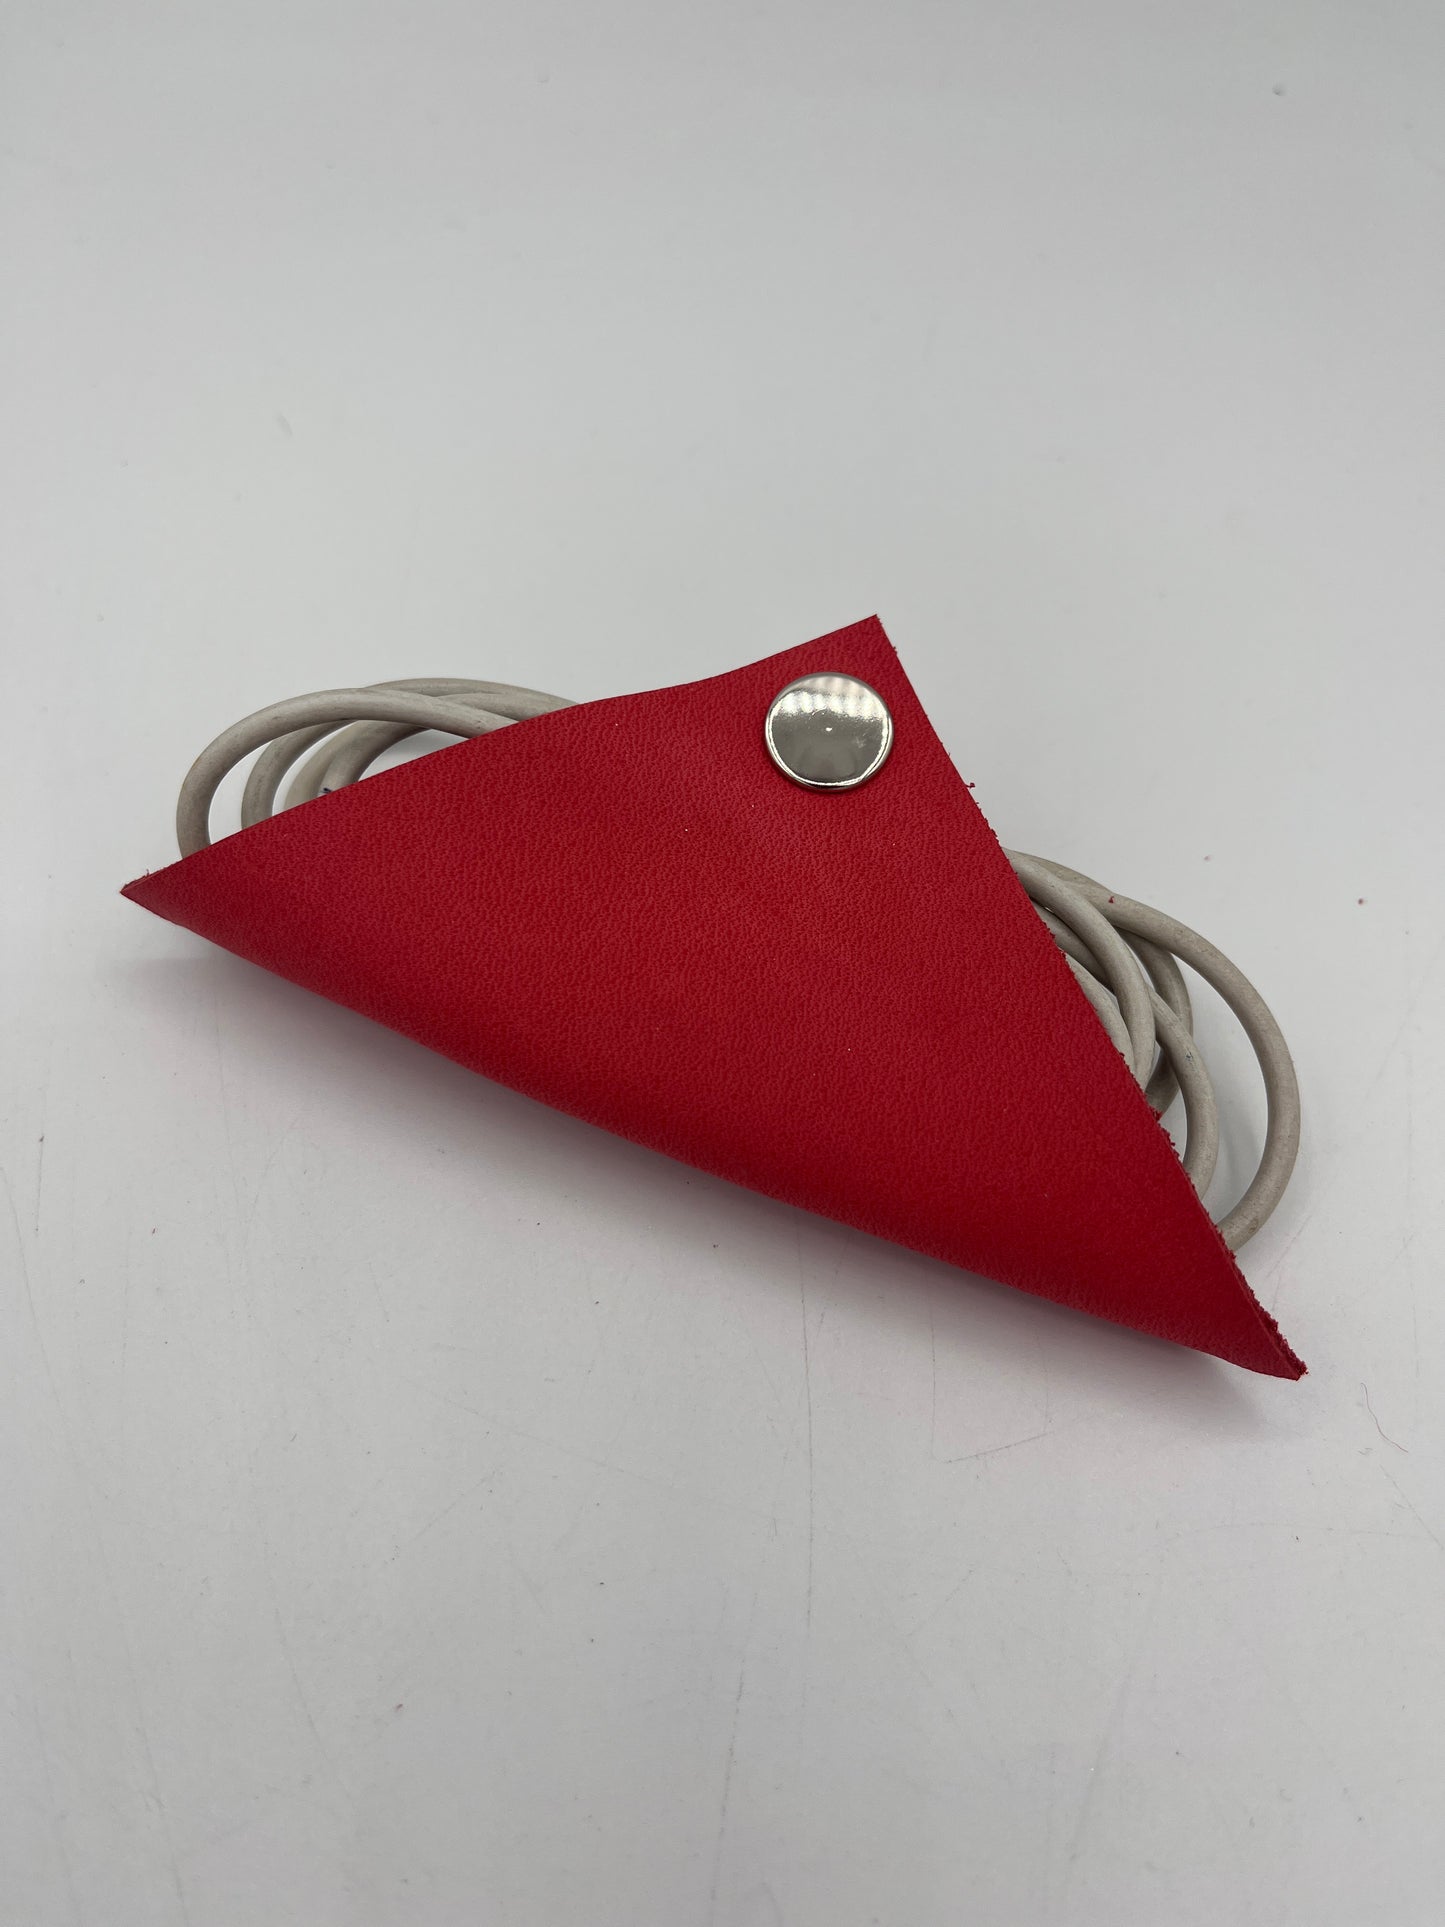 HANDCRAFTED LEATHER CABLE HOLDER